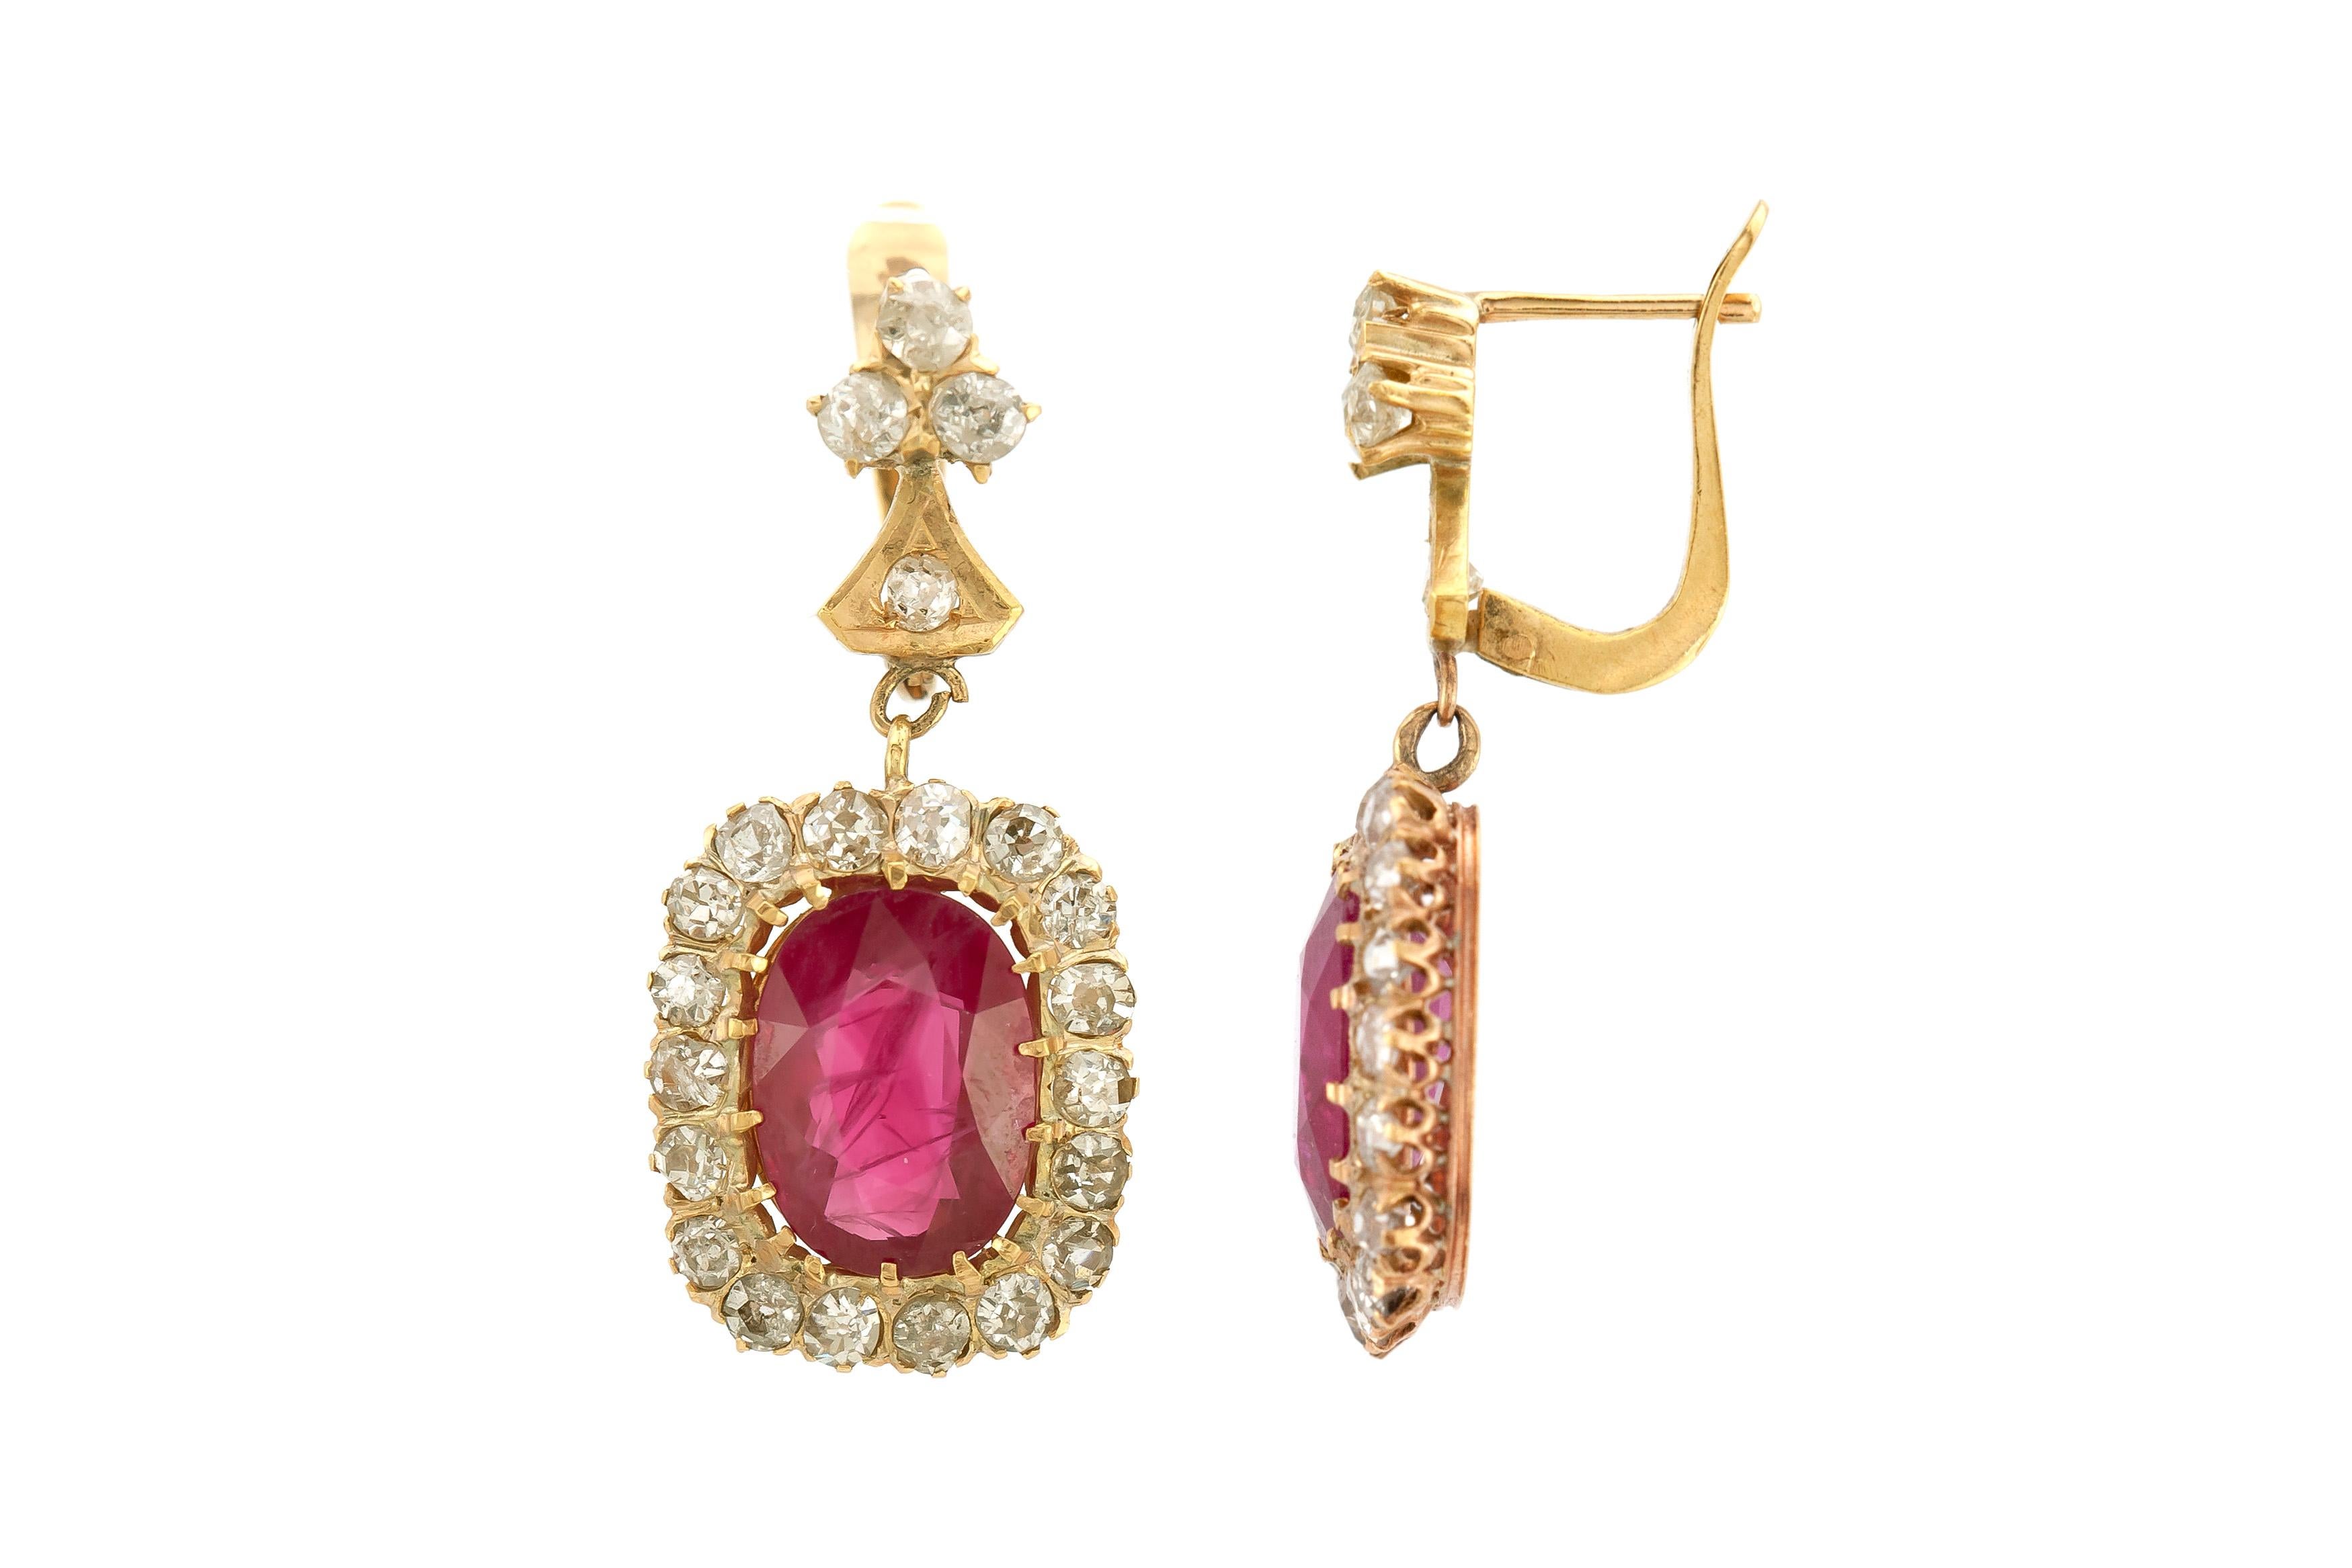 The earrings are finely crafted in 18 k yellow gold with the center stone ruby weighing approximately total of 6.19 carat. One ruby is 3.08 carat while the other is 3.11 carat. Diamonds weigh approximately a total of 3.50 carat.
